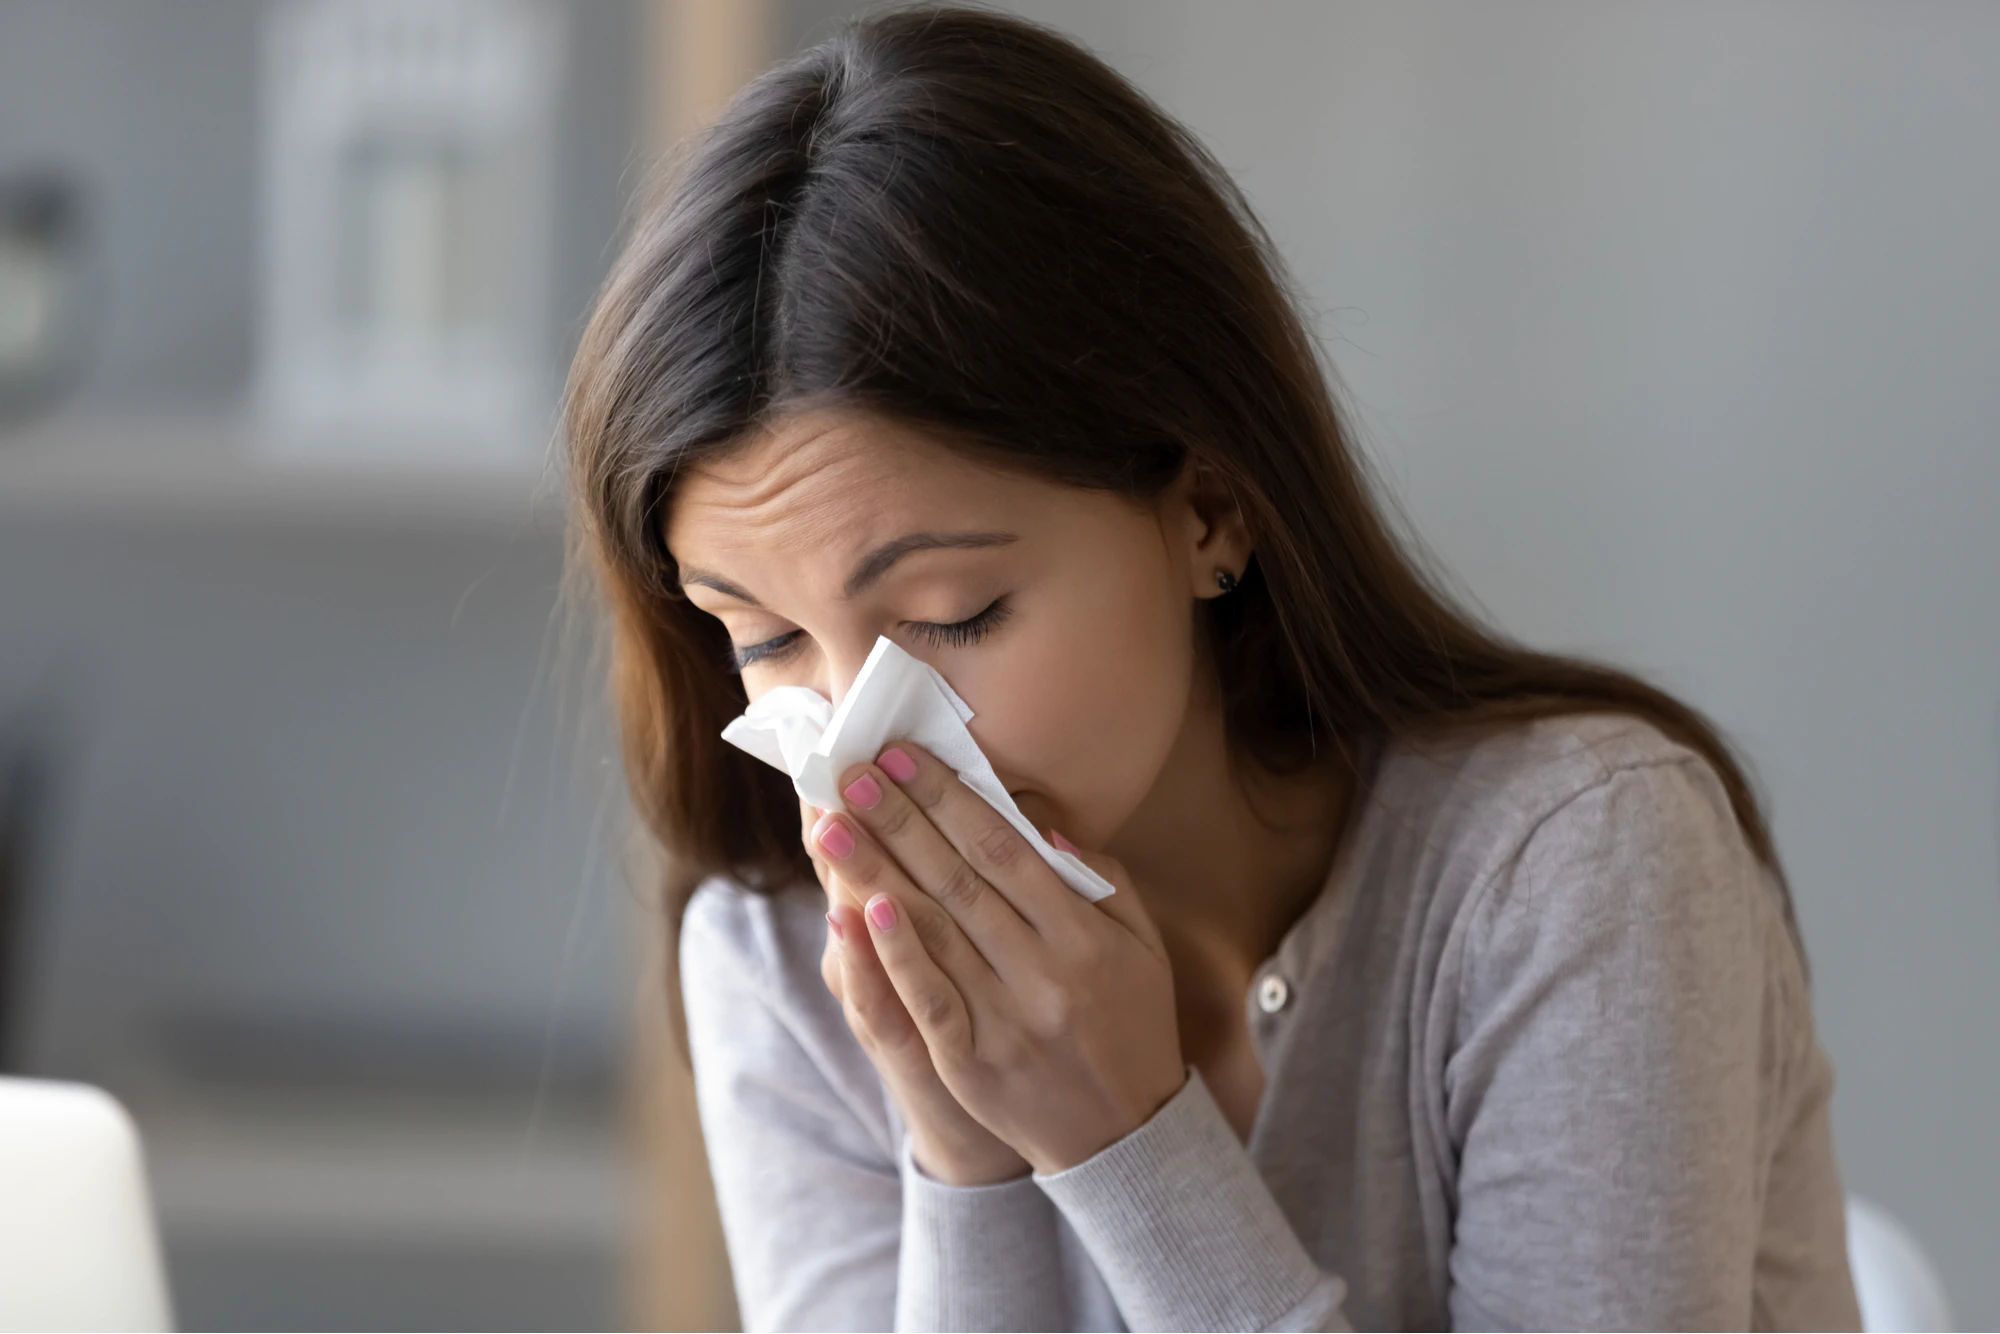 Symptoms of allergic rhinitis Clear, watery nasal discharge